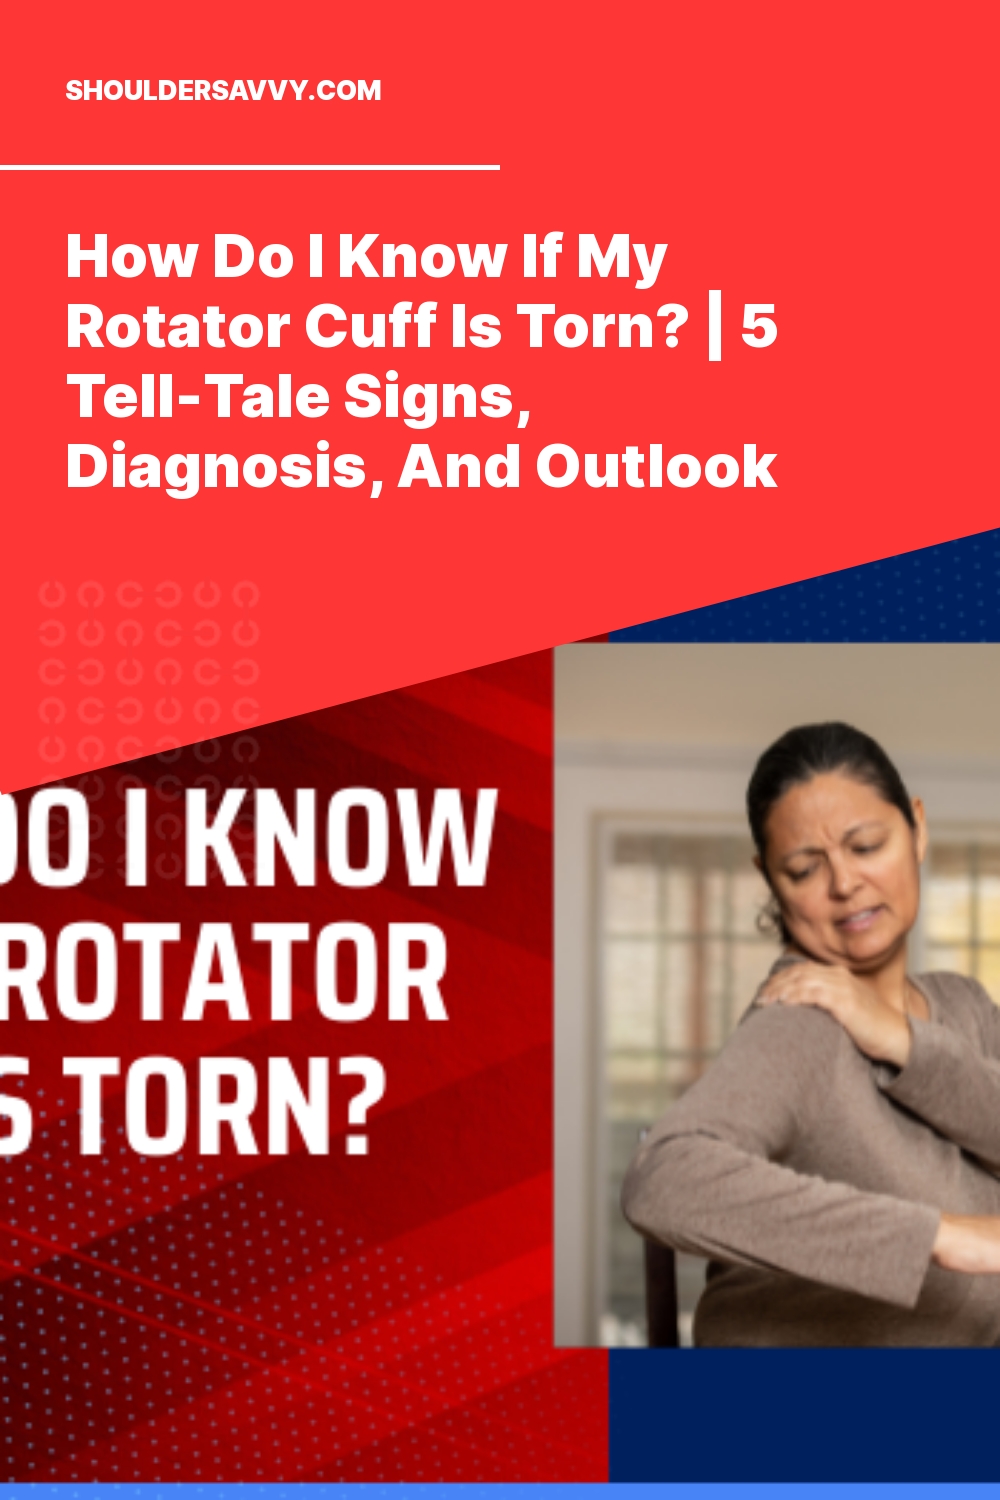 How Do I Know If My Rotator Cuff Is Torn? | 5 Tell-Tale Signs, Diagnosis, And Outlook